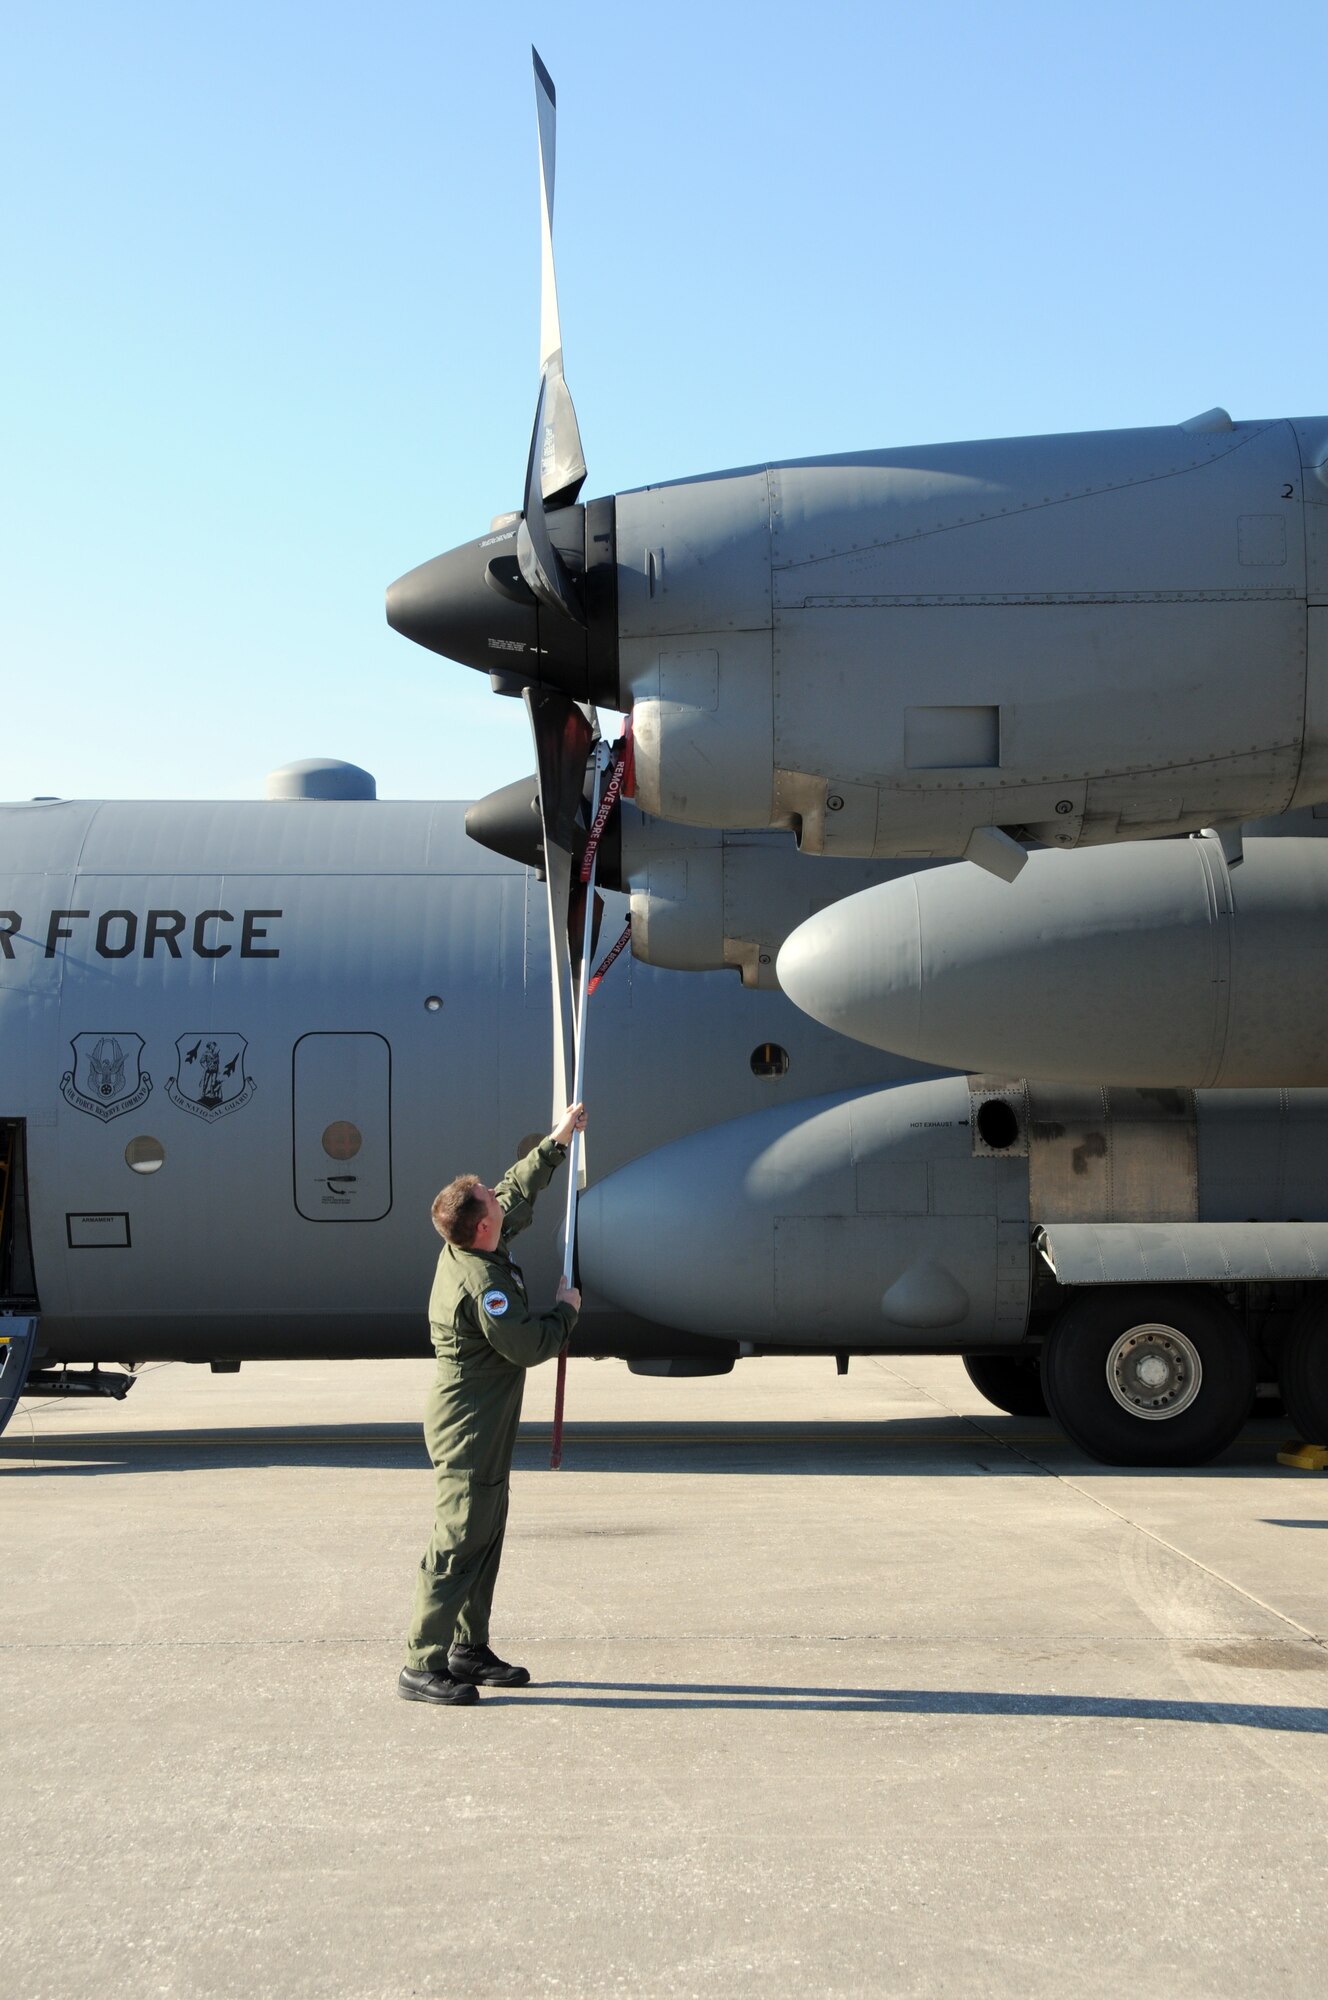 107th AW load master Senior Master Sgt. Thomas Obrochta readies a C-130 for flight. The sergeant volunteered along with other aircrew in support of Operation Unified Relief. (U.S. Air Force photo/staff Sgt. Peter Dean)  